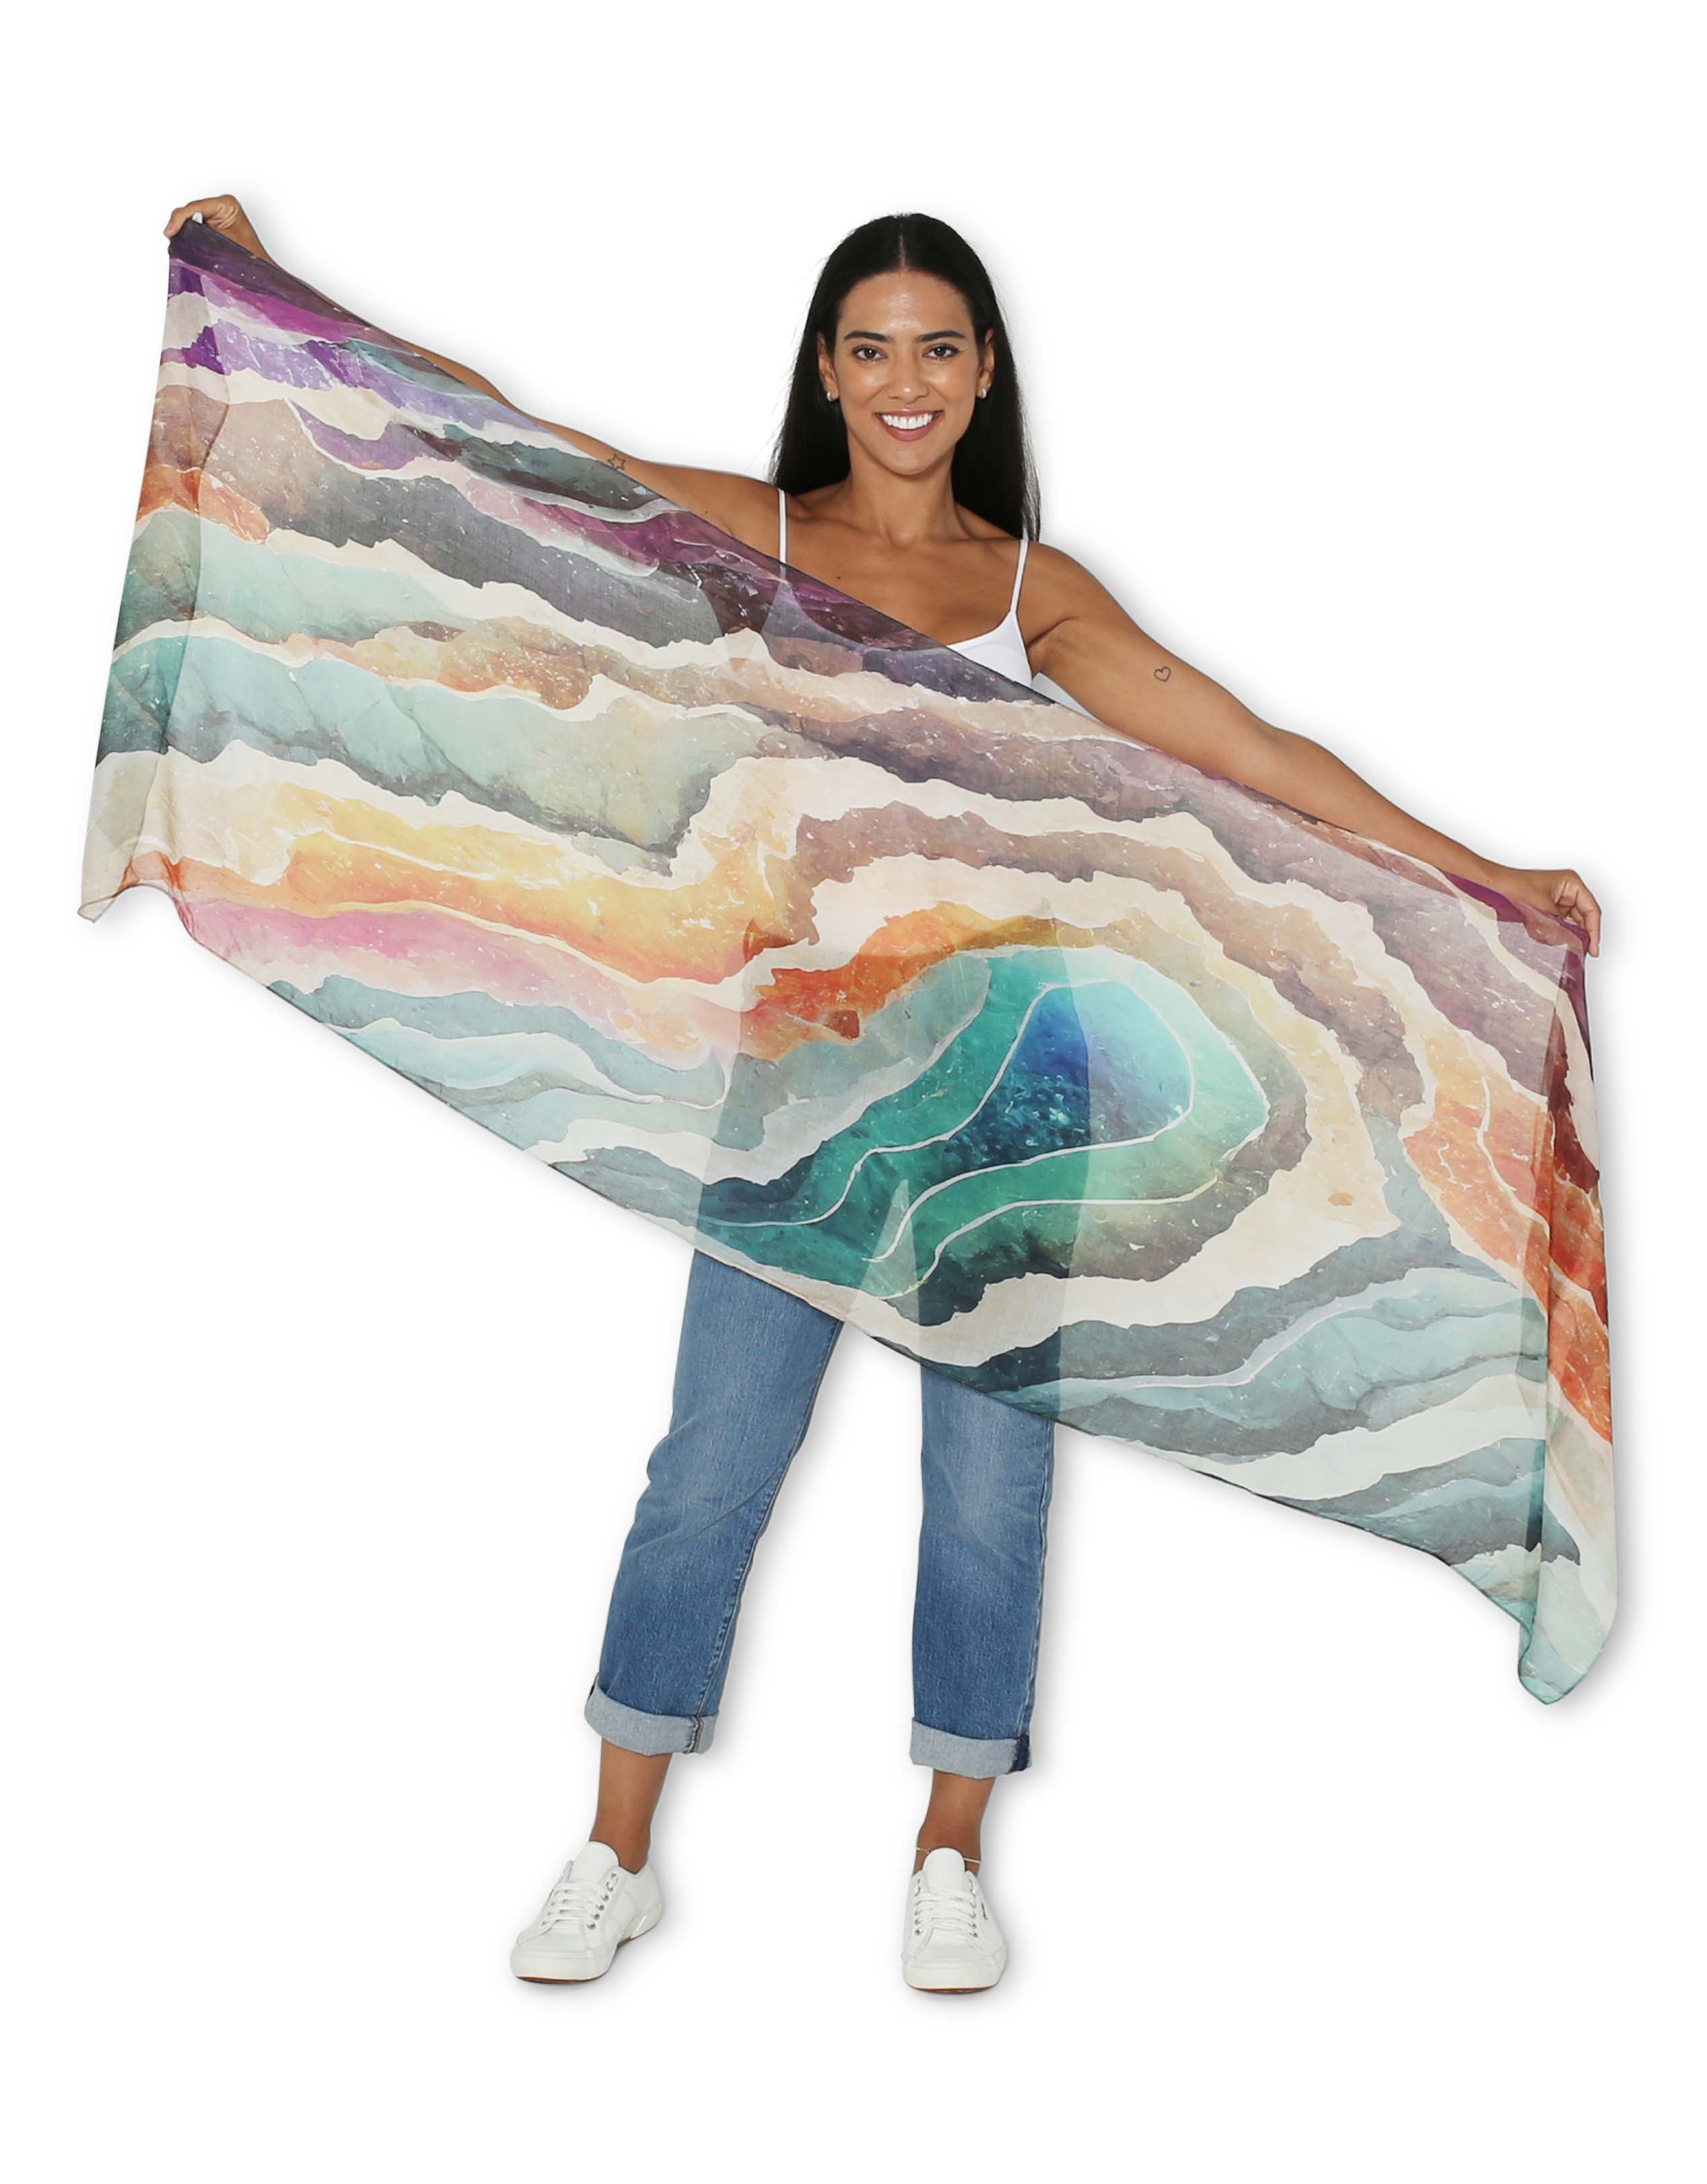 The Artists Label Earthen Rainbow Scarf